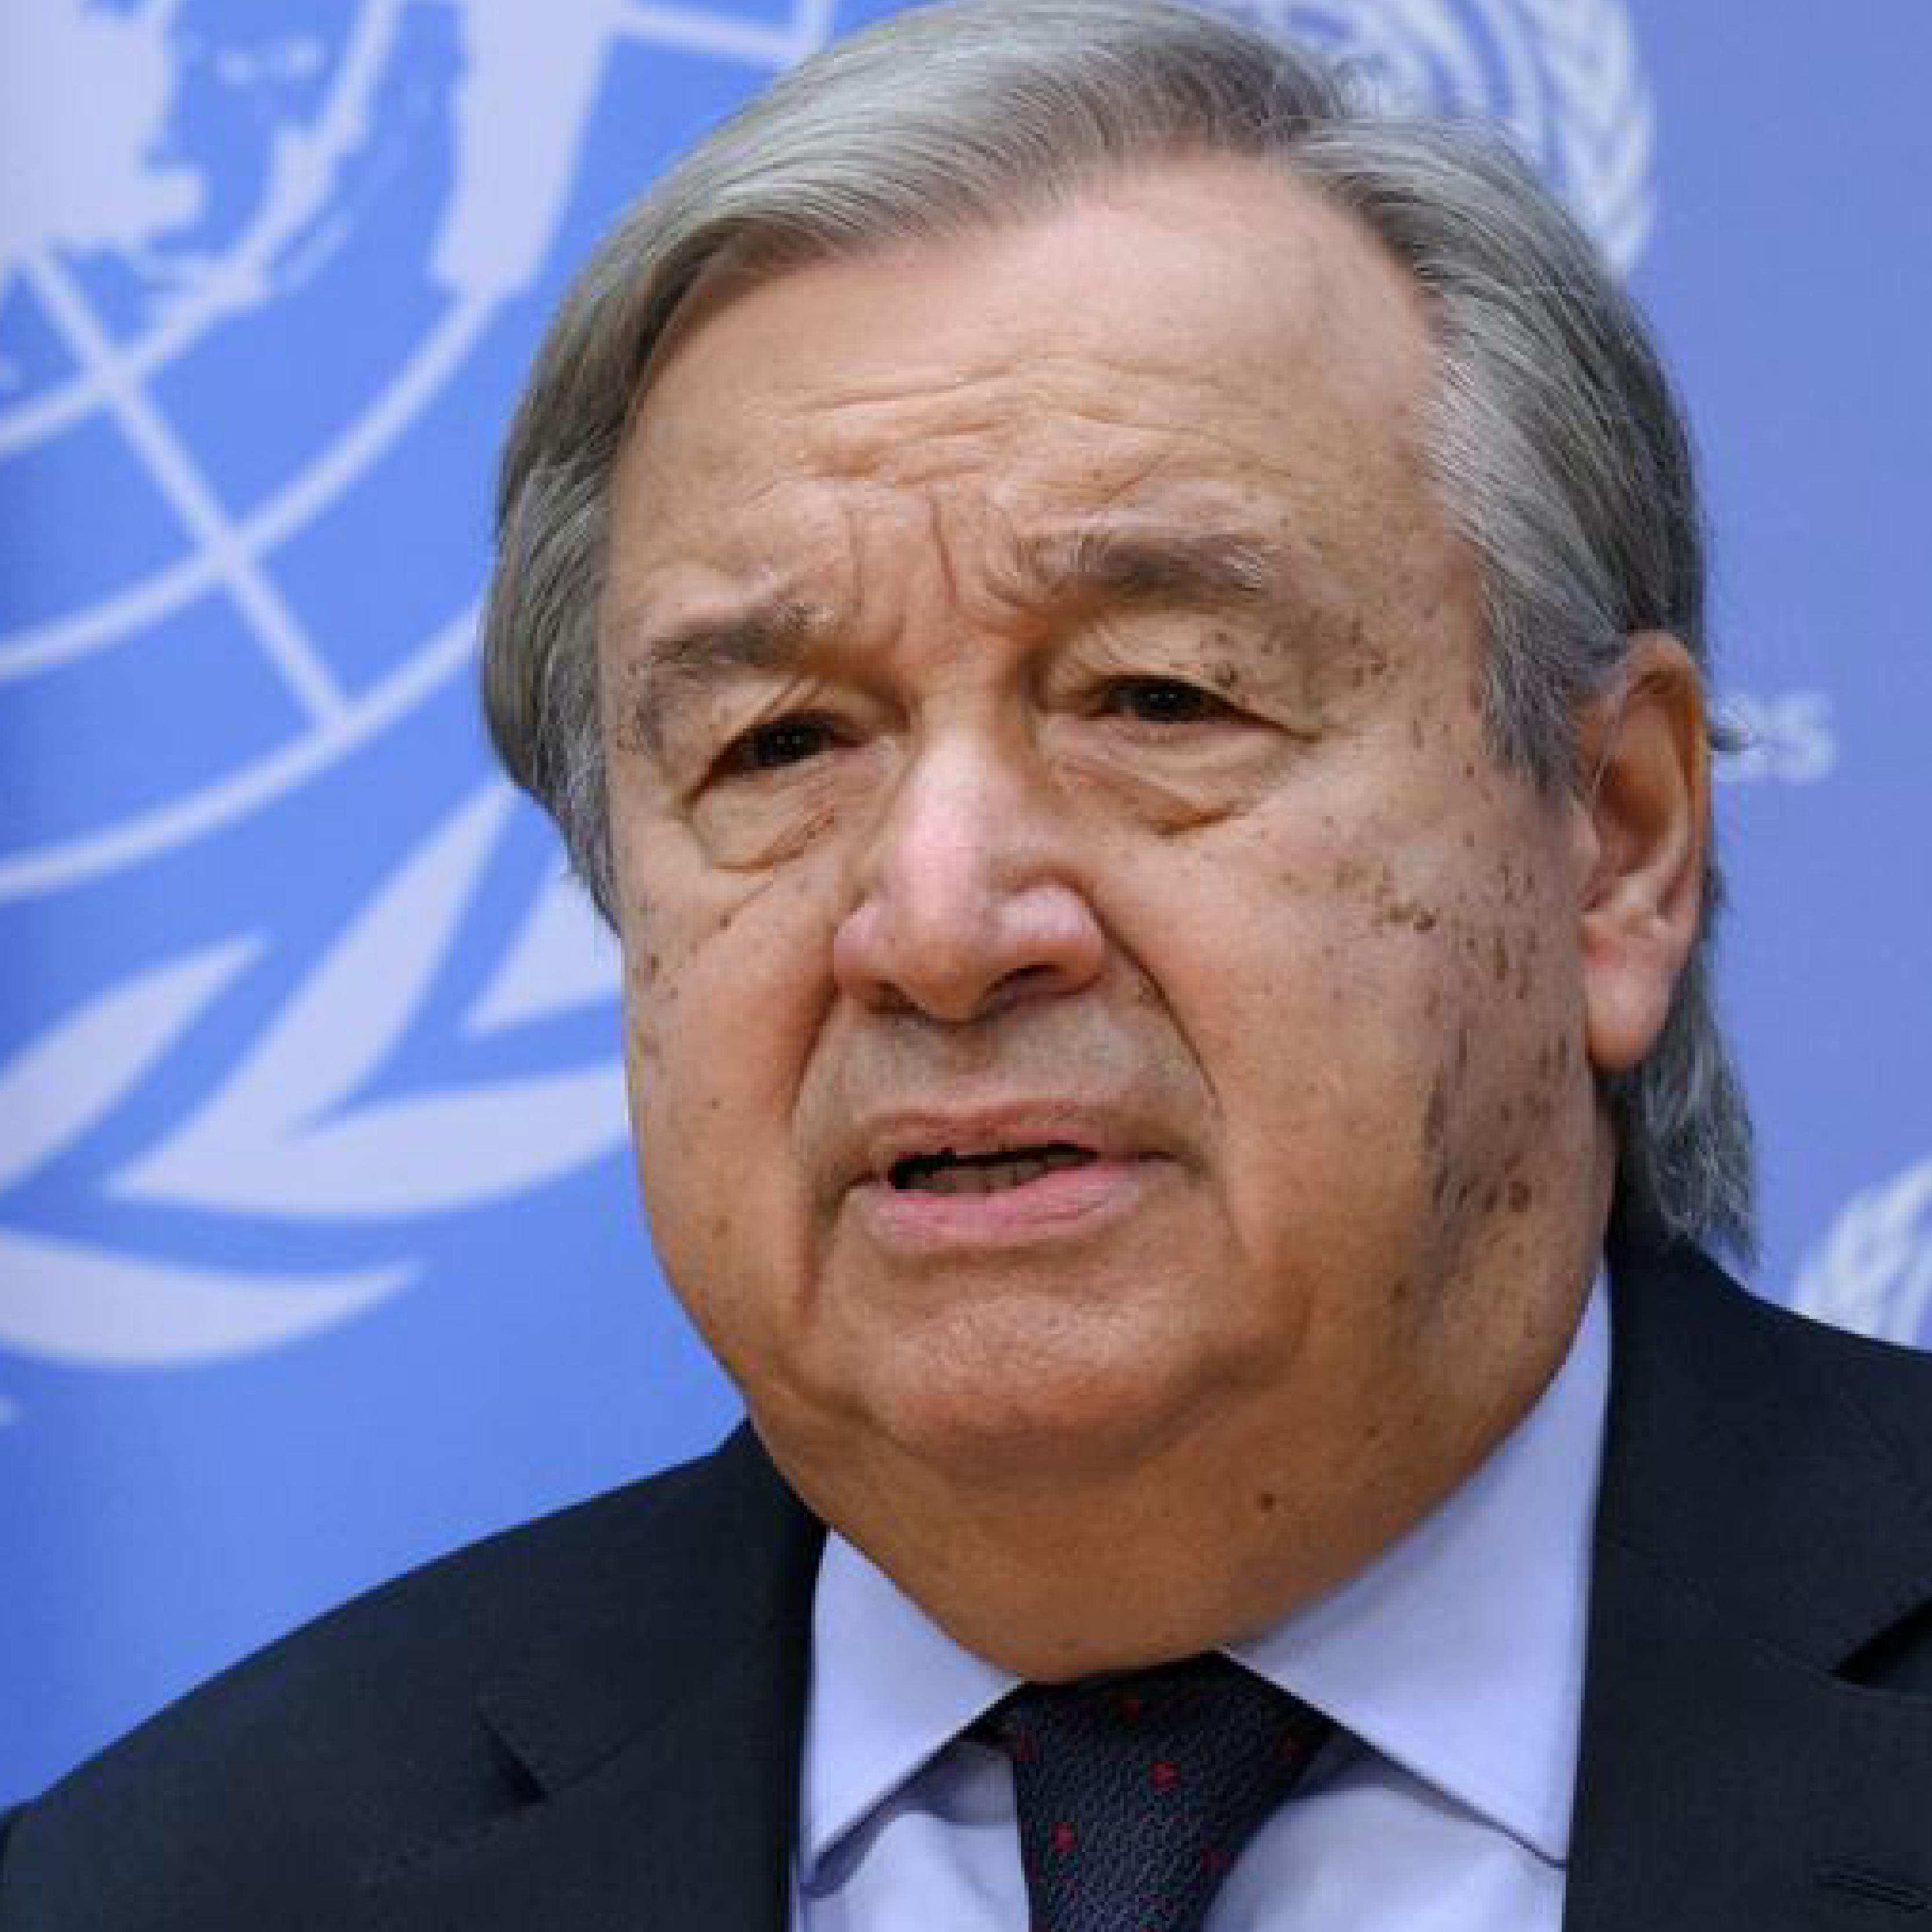 Secretary-General António Guterres briefs reporters on the decision of the Russian Federation on annexation of the Ukrainian territory.